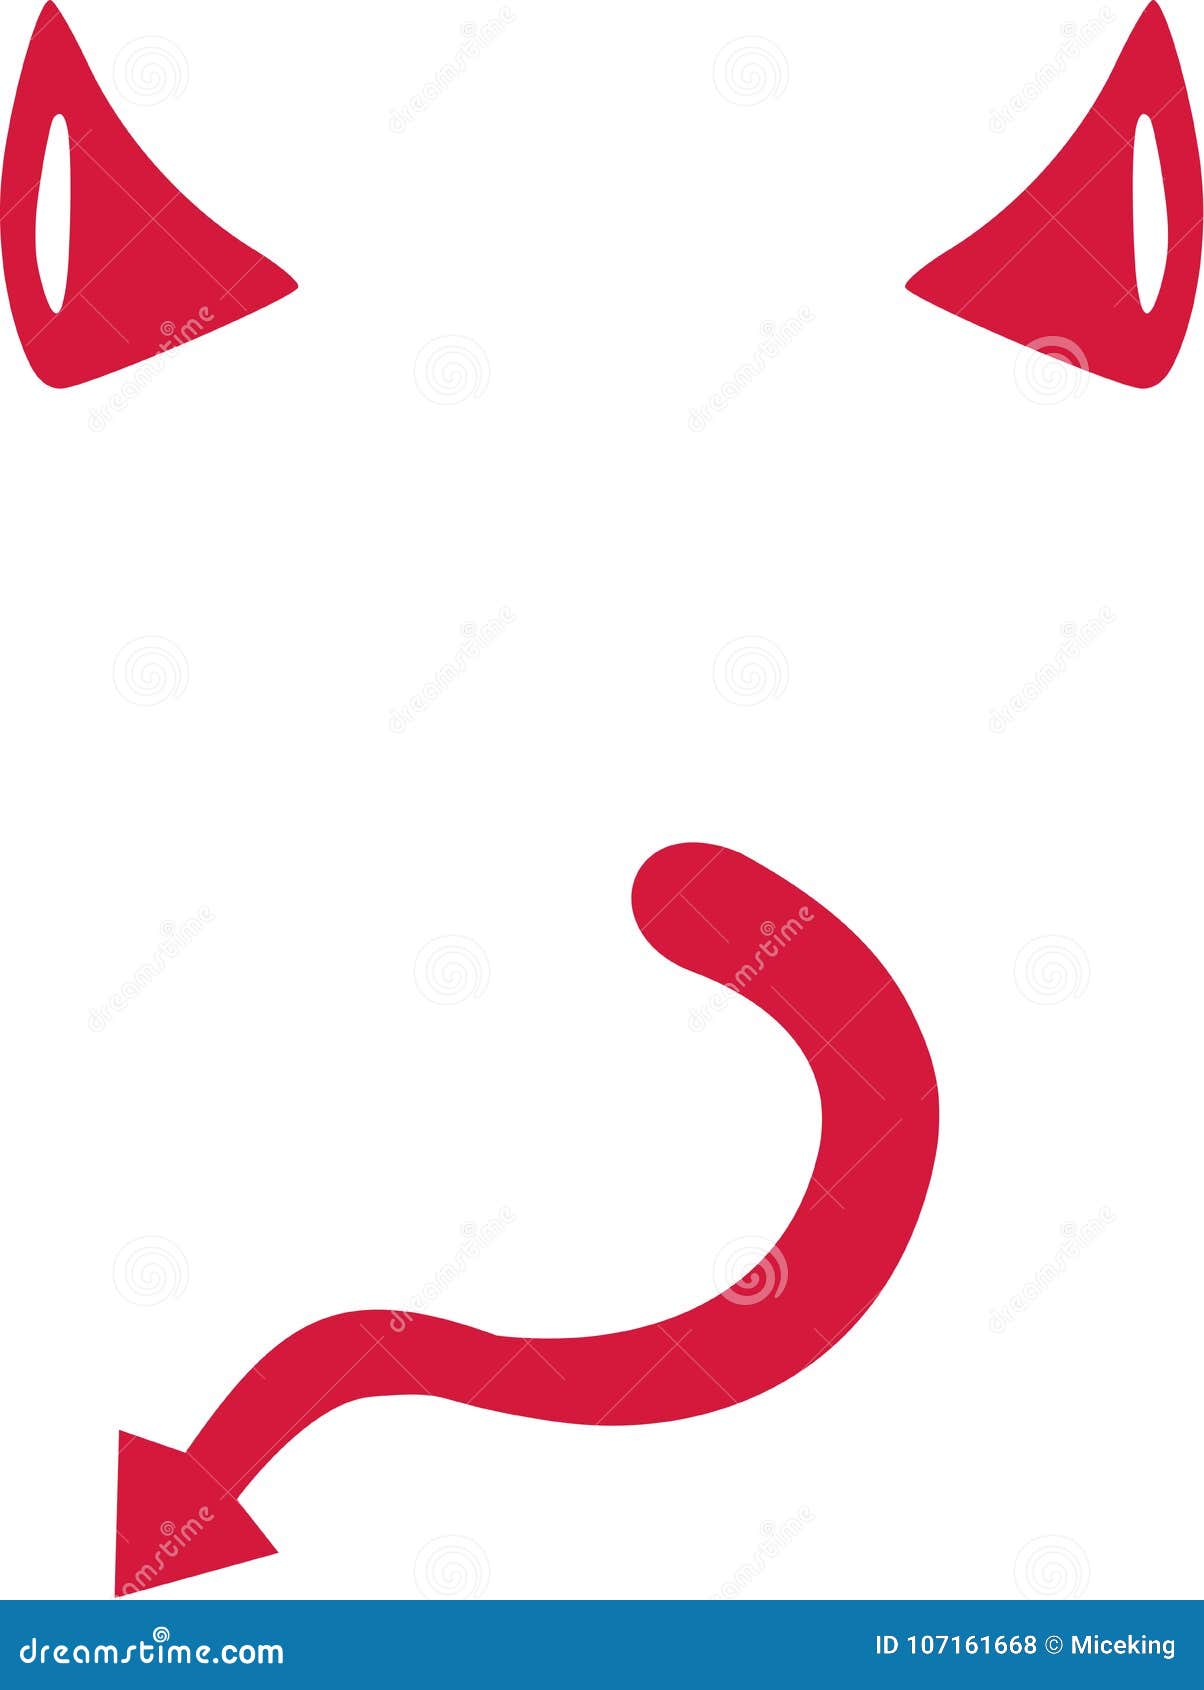 devil horns with tail